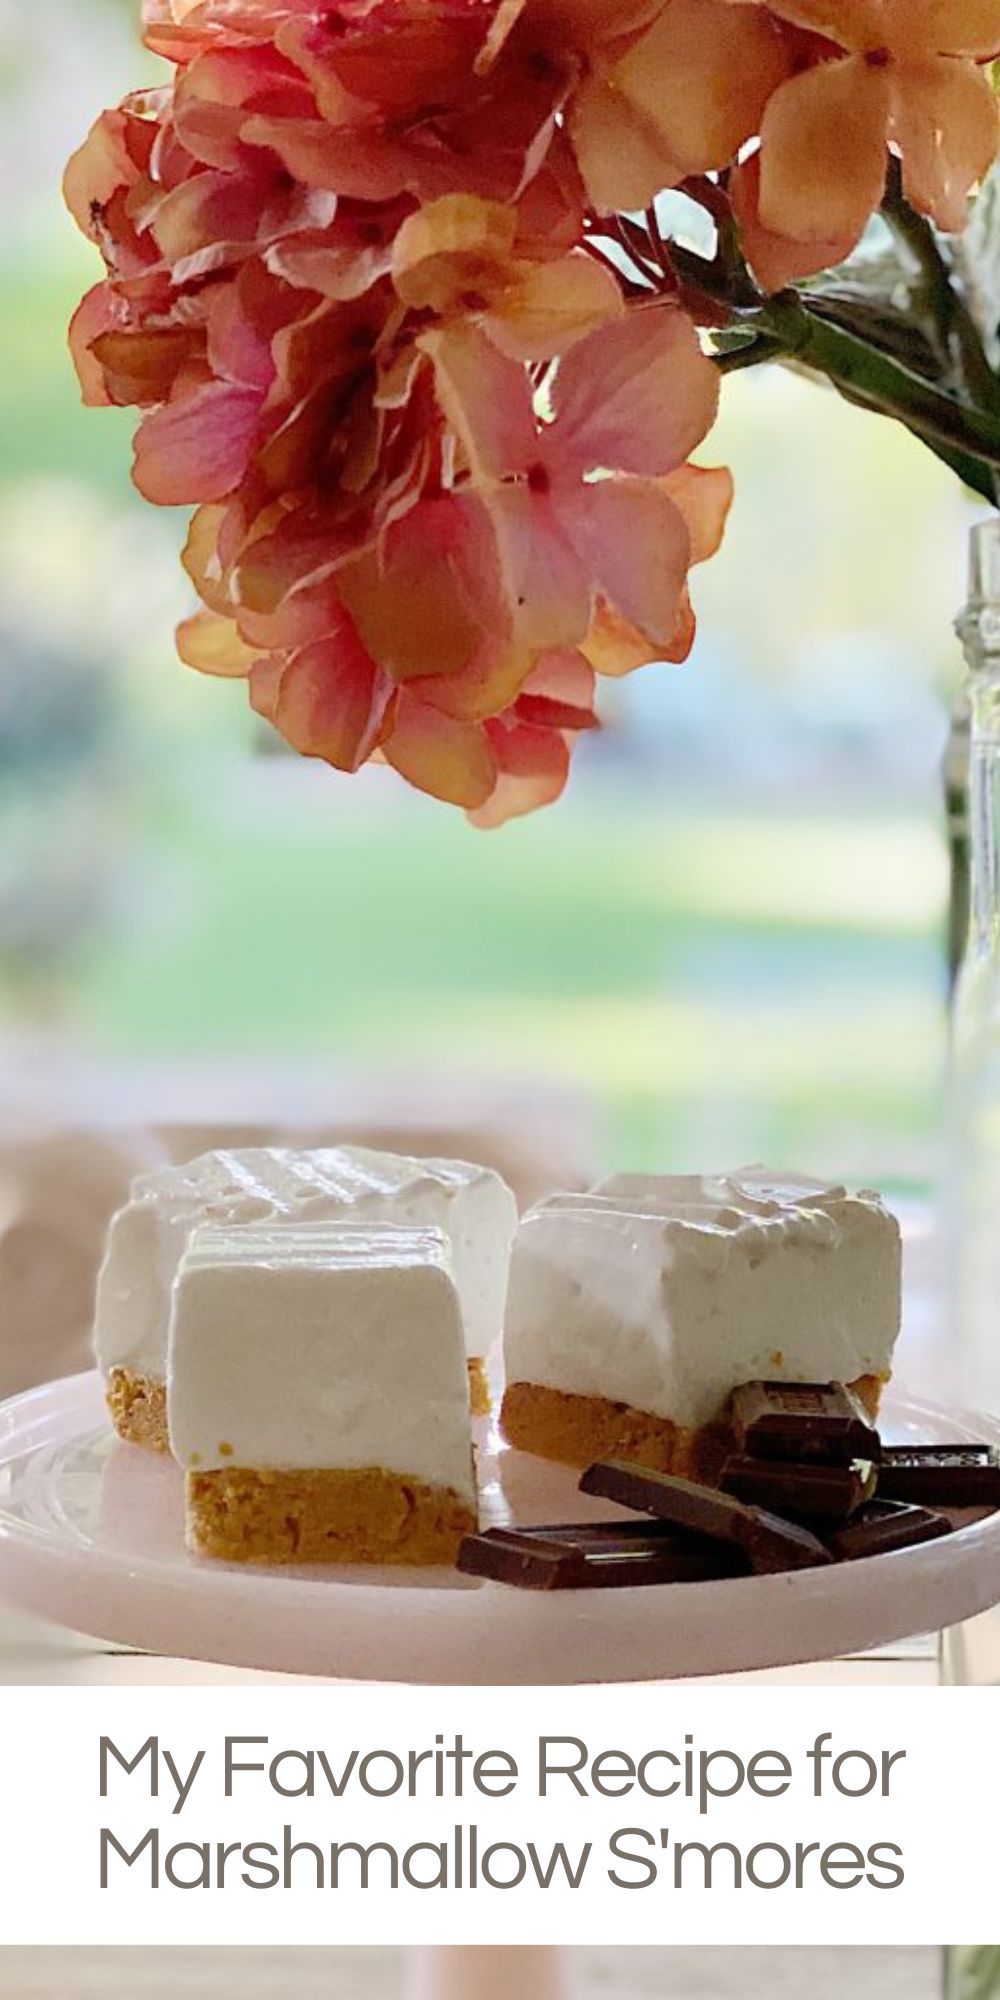 Homemade Marshmallows are not only fun to make but they taste delicious! Today I am sharing my favorite Marshmallow dessert recipe for S'mores.